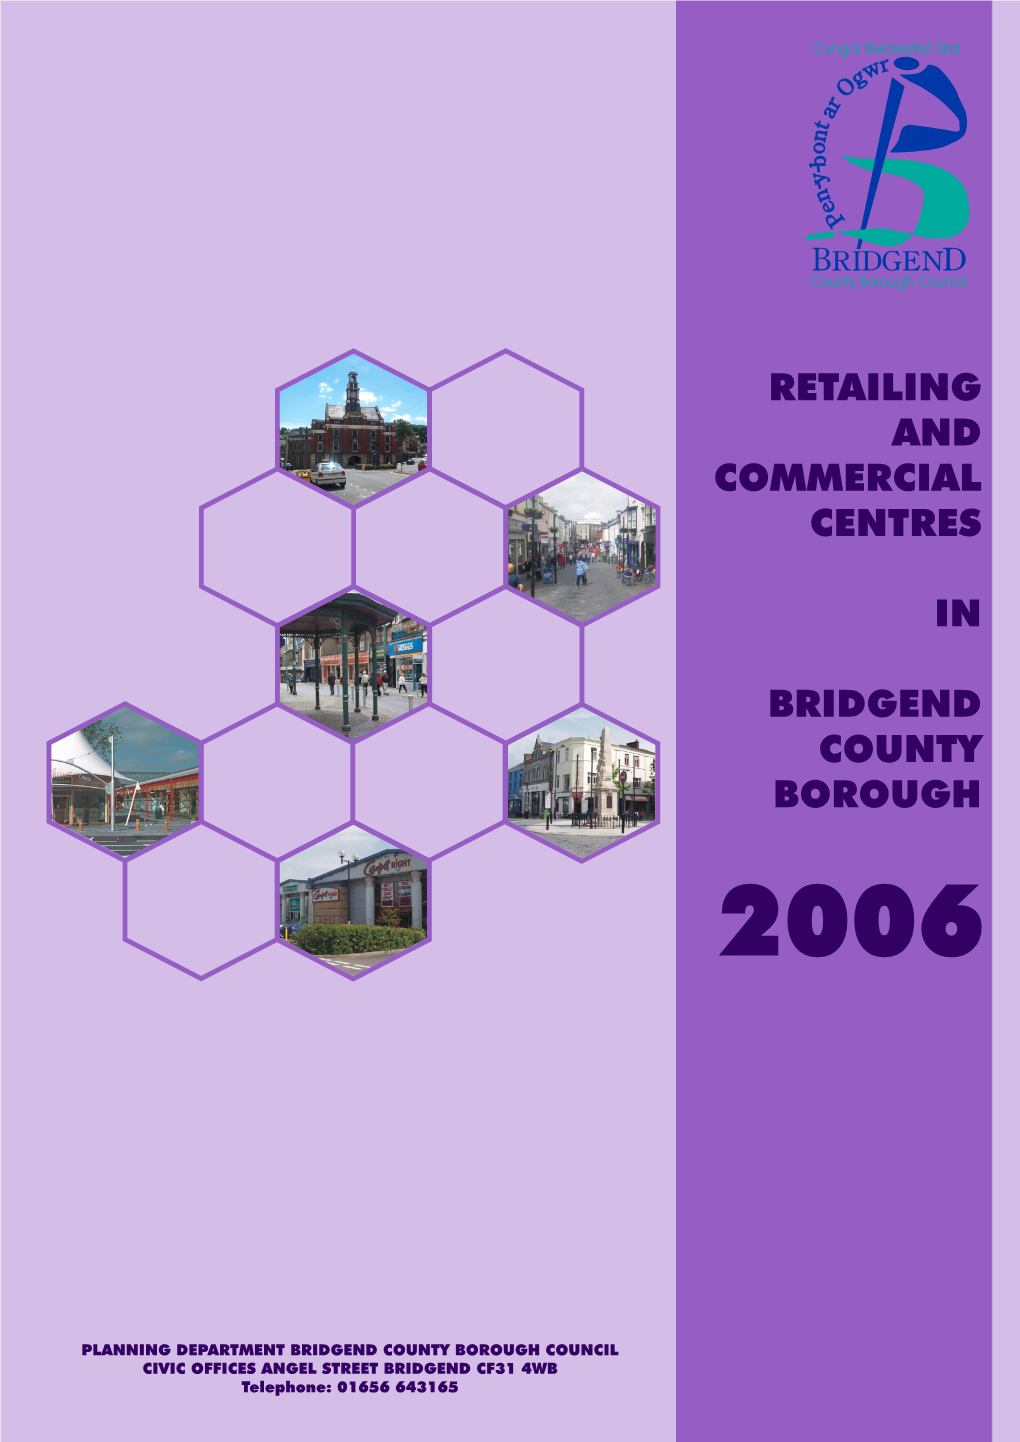 Retailing and Commerical Centres In